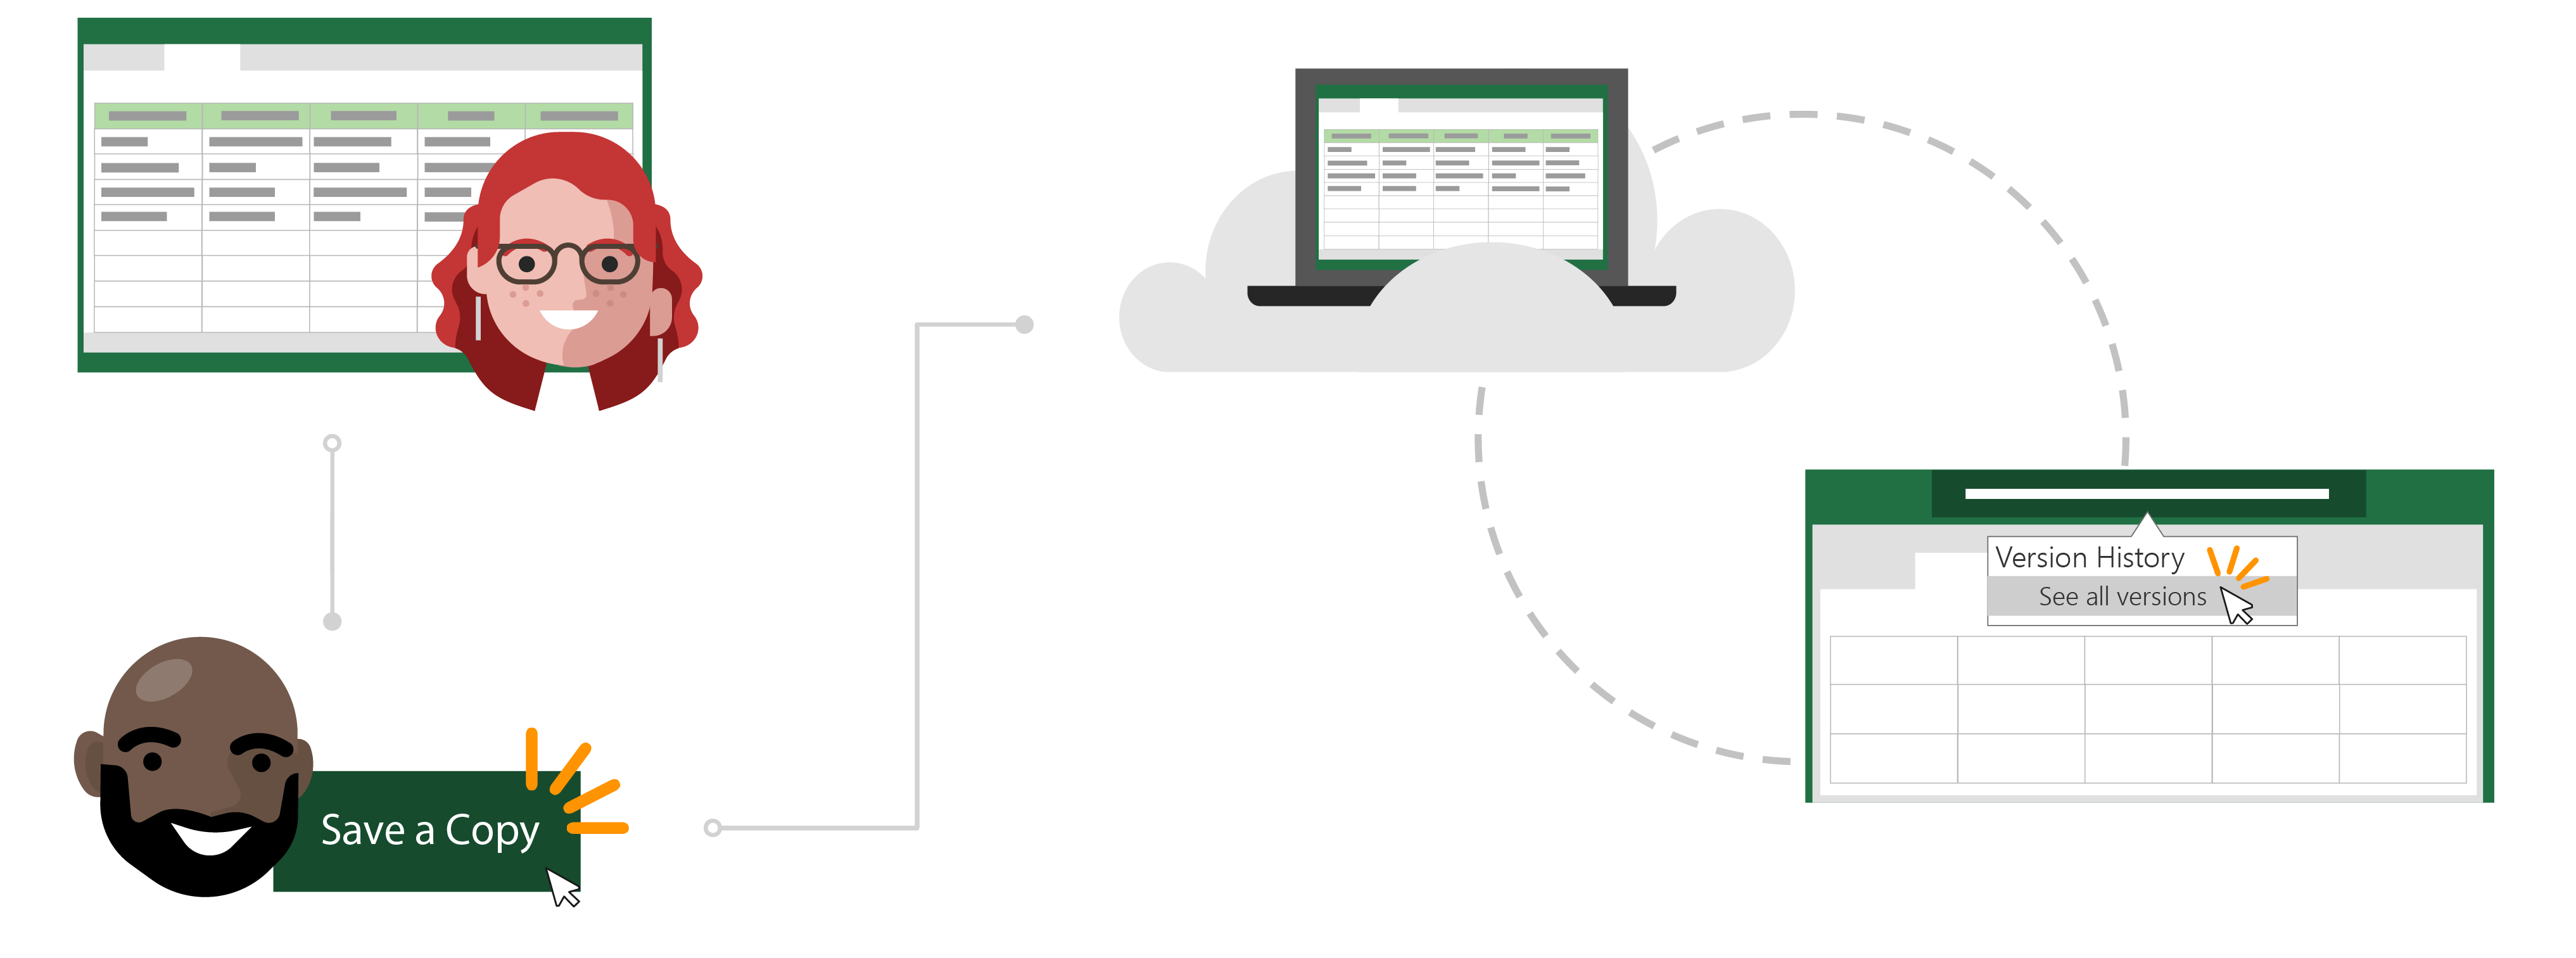 Use an existing file in the cloud as a template for a new file using Save a Copy.